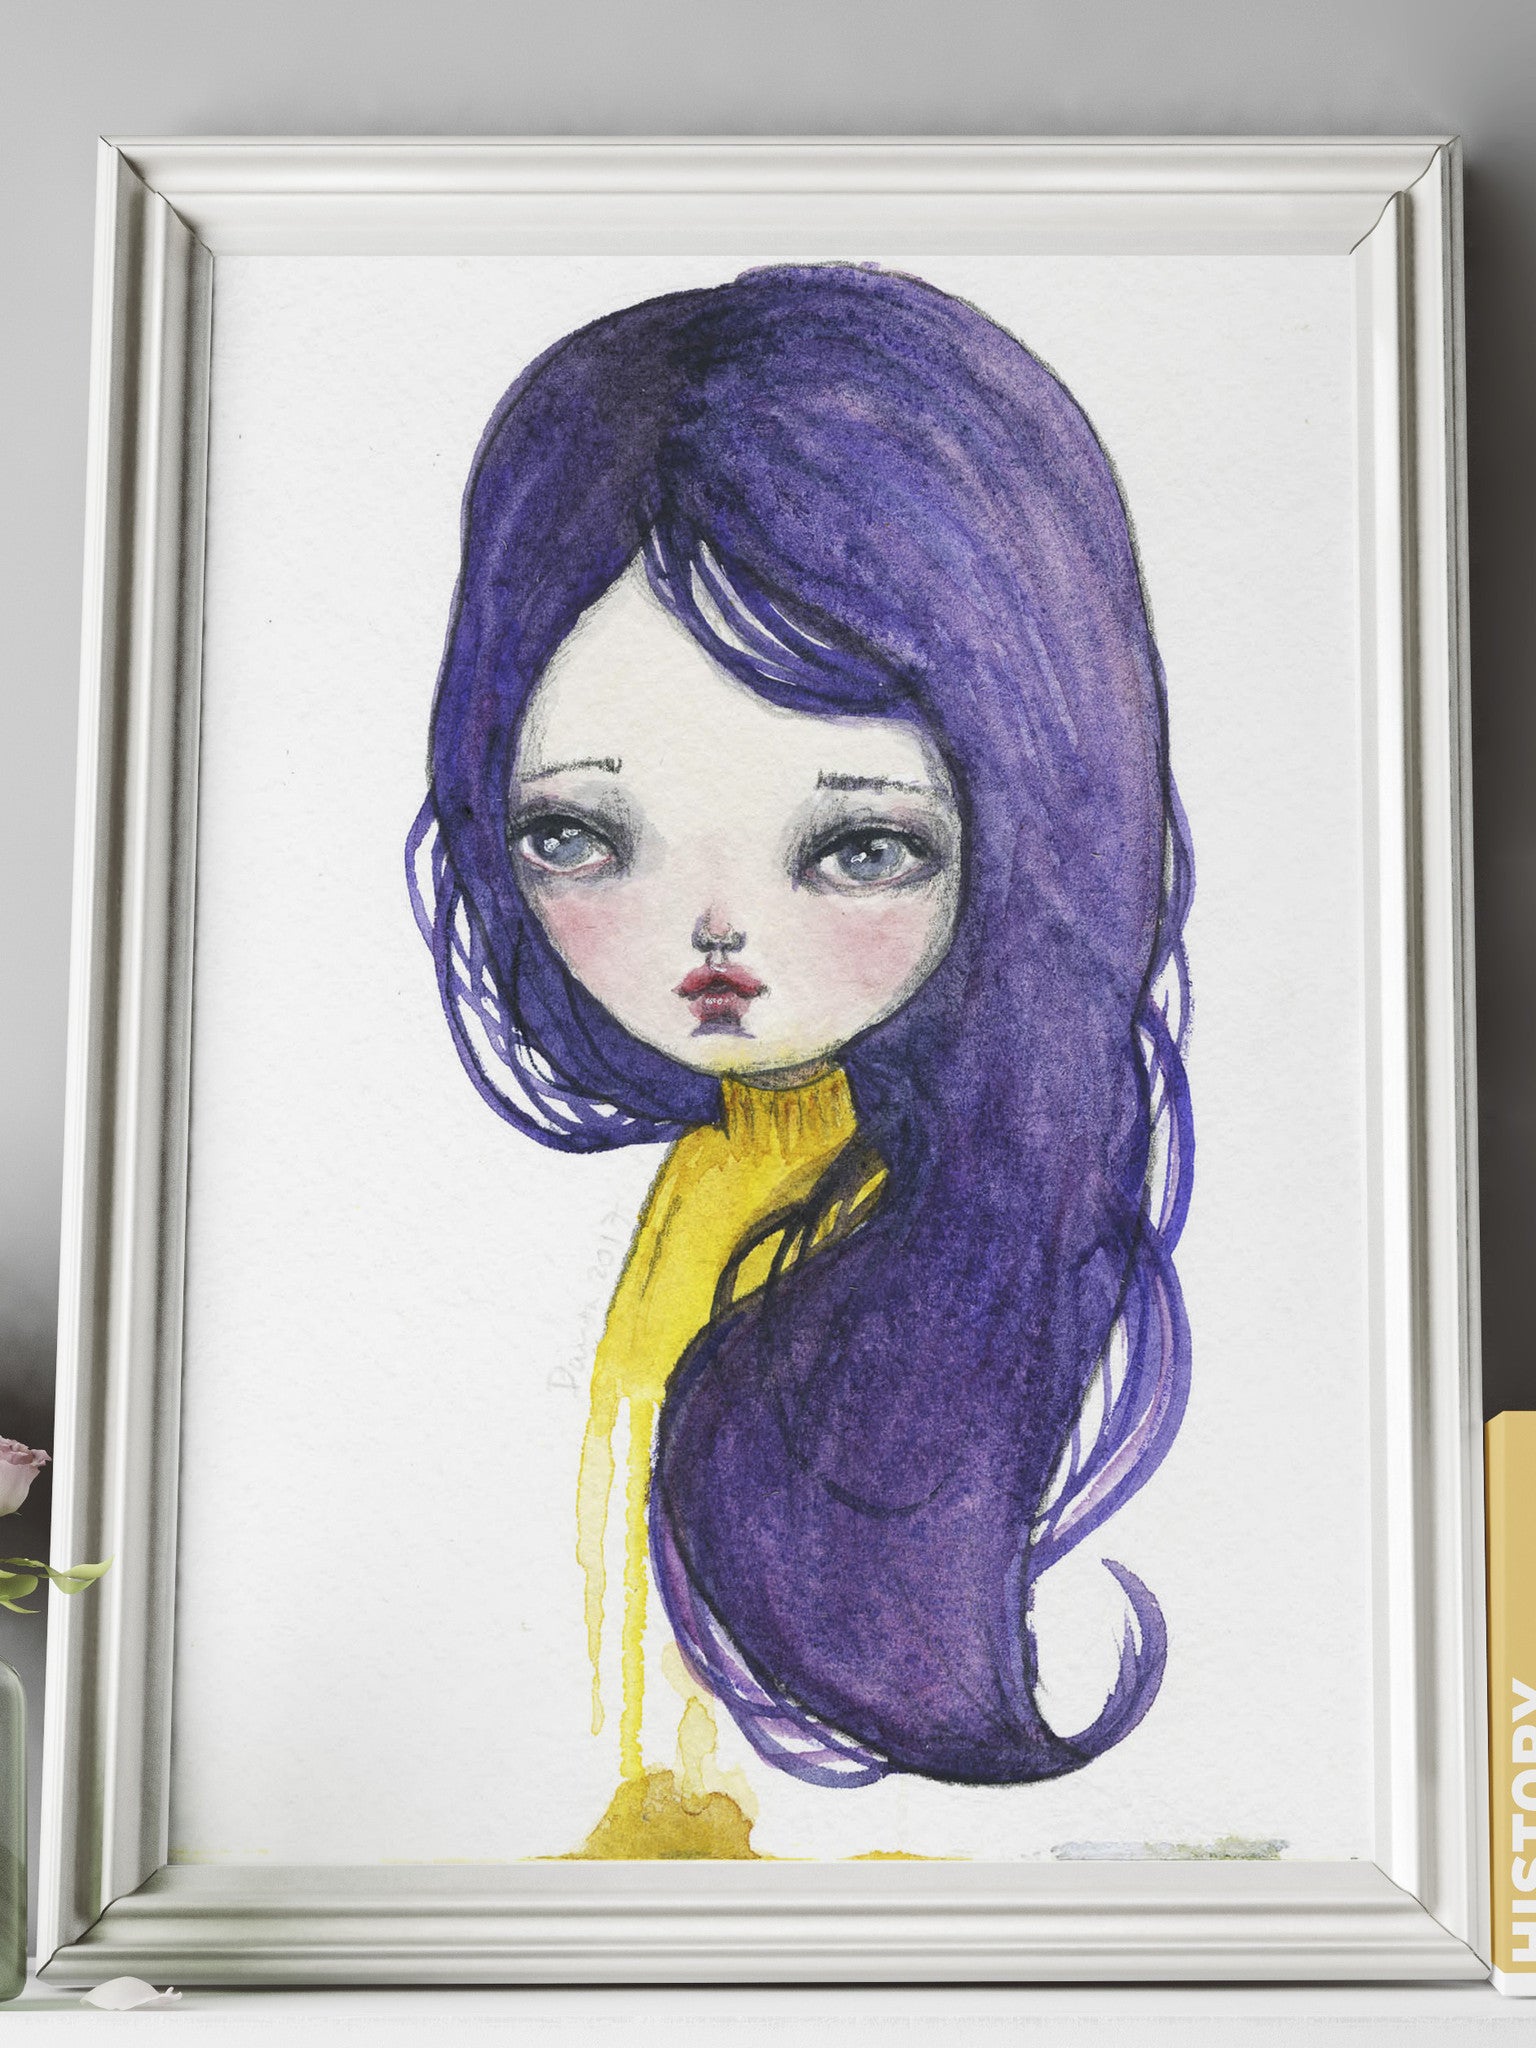 A beautiful surreal girl with purple hair materialized on Danita's latest watercolor painting art.